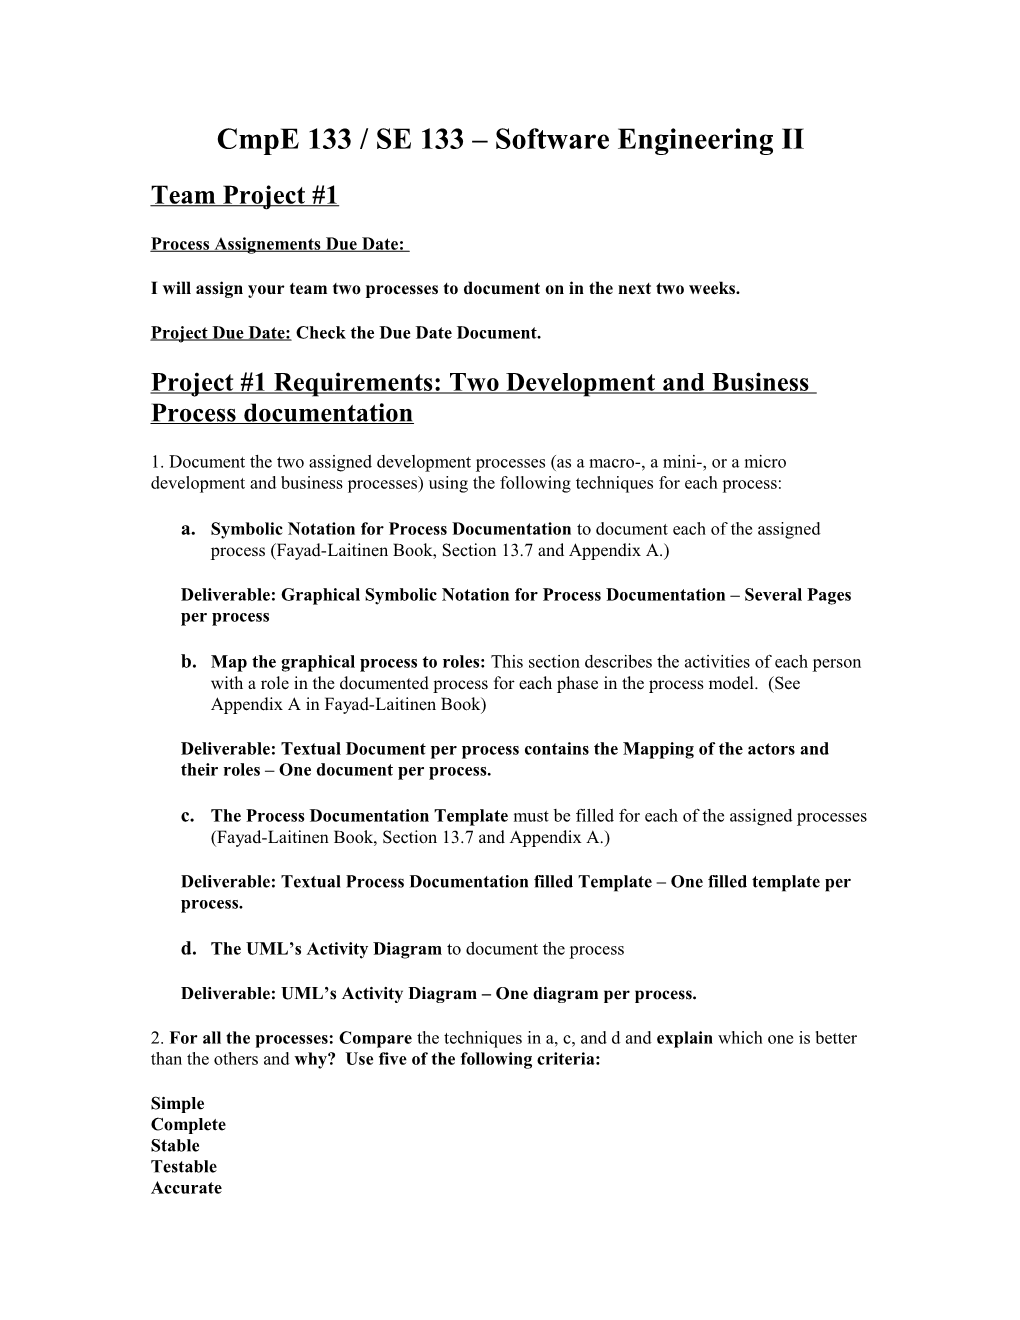 Requirements Assignment And Project Bidding